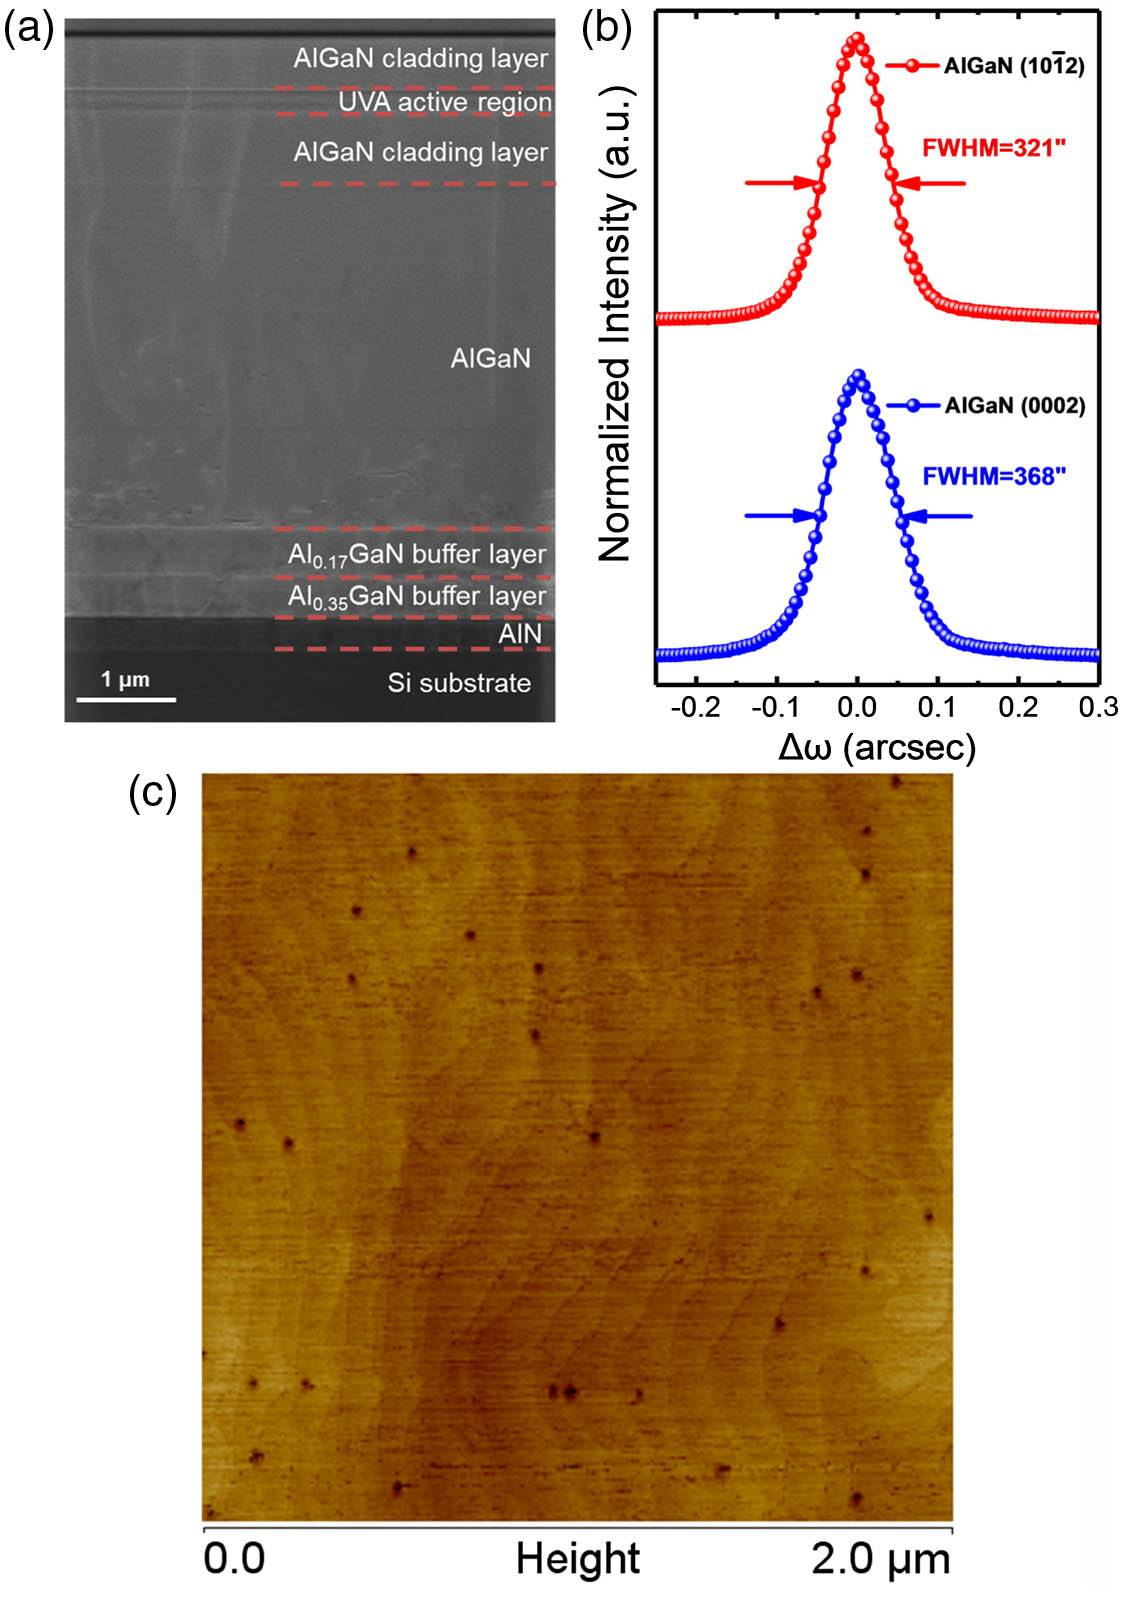 (a) Cross-sectional transmission electron microscopy (TEM) image, (b) double crystal X-ray rocking curves for the AlGaN (0002) and (101¯2) planes of the NUV LD structure grown on Si, and (c) AFM surface image of the AlGaN grown on Si.